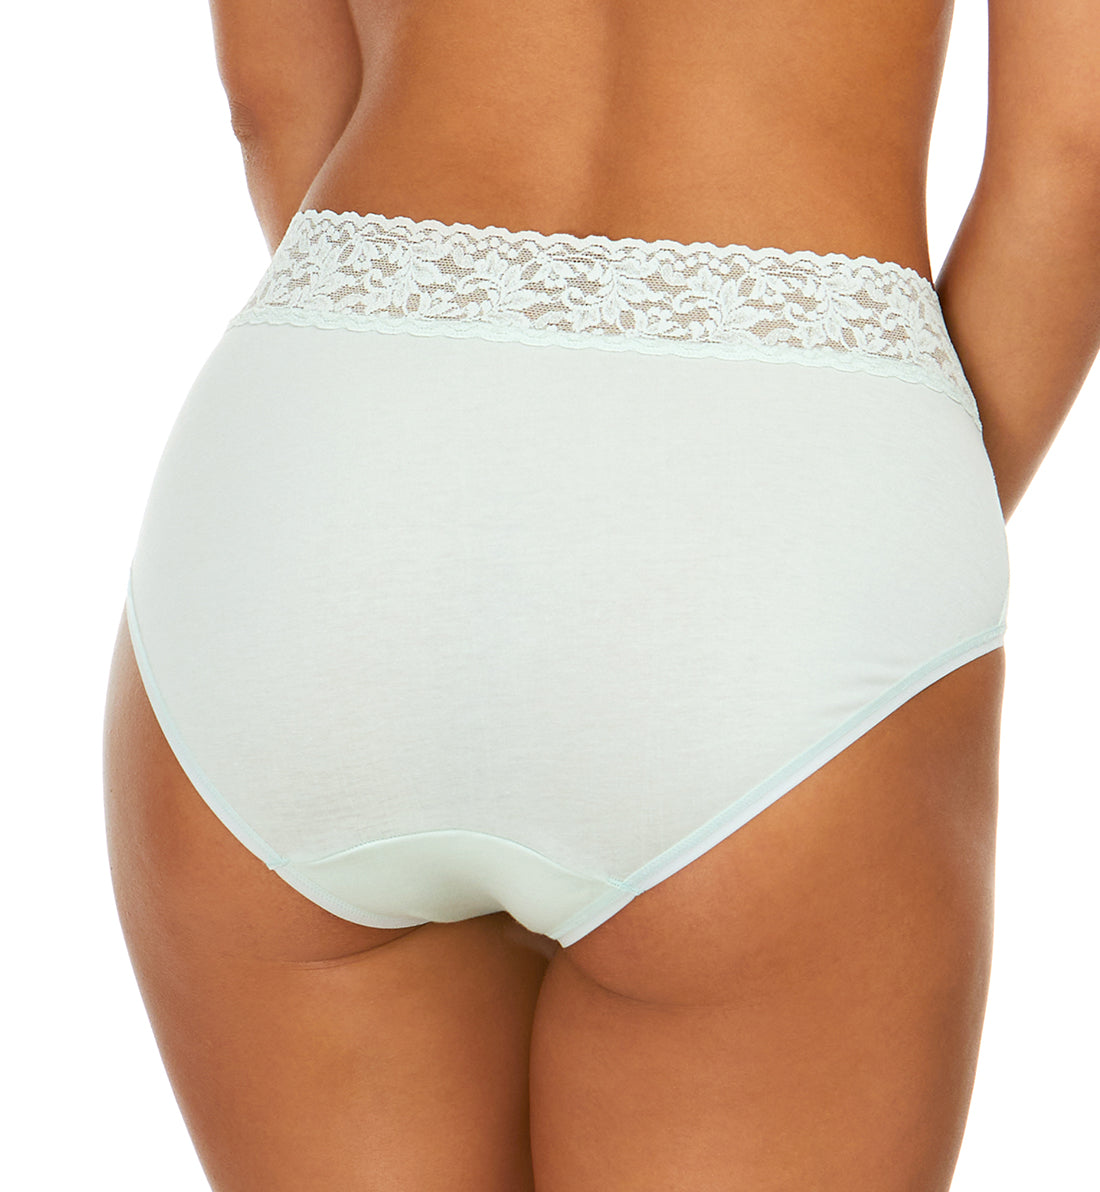 Hanky Panky Cotton French Brief with Lace (892461),Small,Cucumber - Cucumber,Small